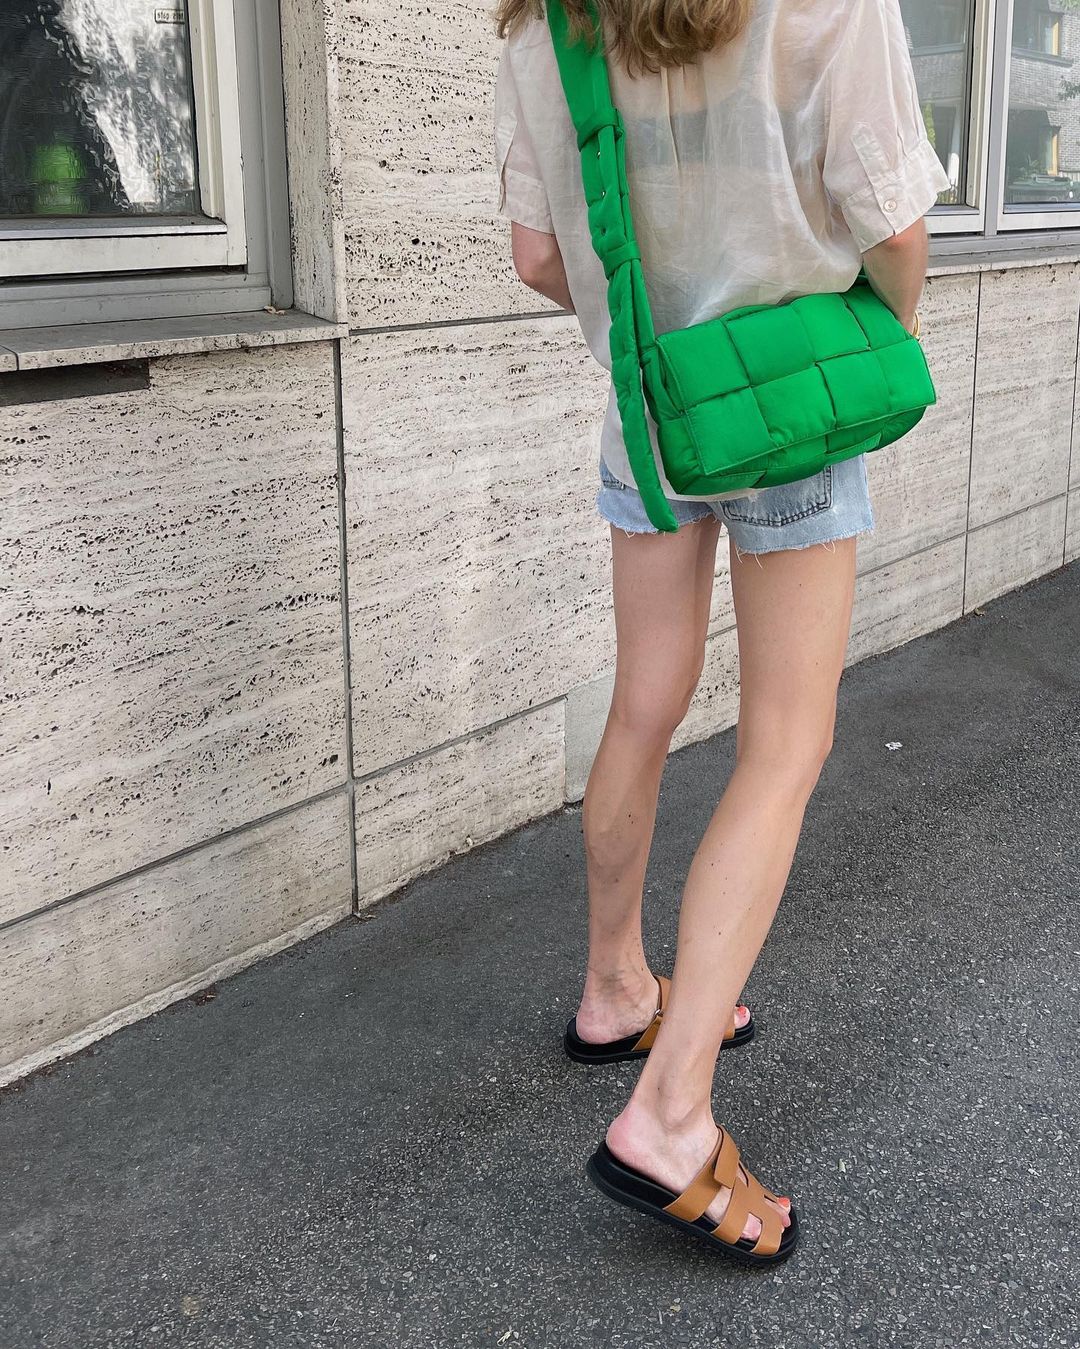 Kelly Green Is Emerging as 2021's Biggest Color Trend | Who What Wear